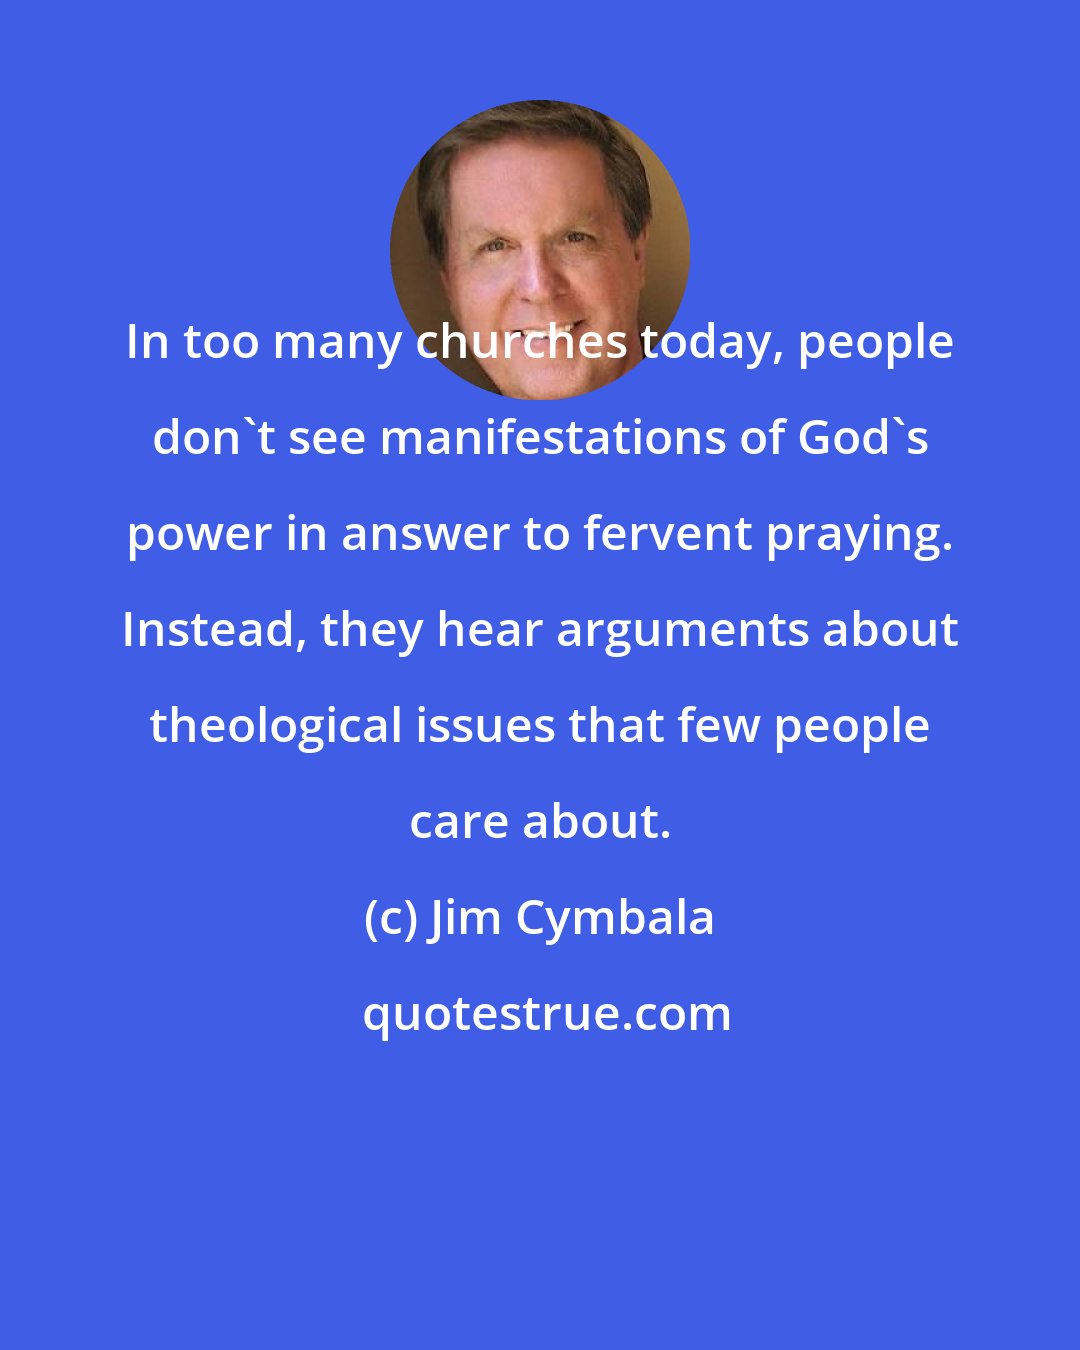 Jim Cymbala: In too many churches today, people don't see manifestations of God's power in answer to fervent praying. Instead, they hear arguments about theological issues that few people care about.